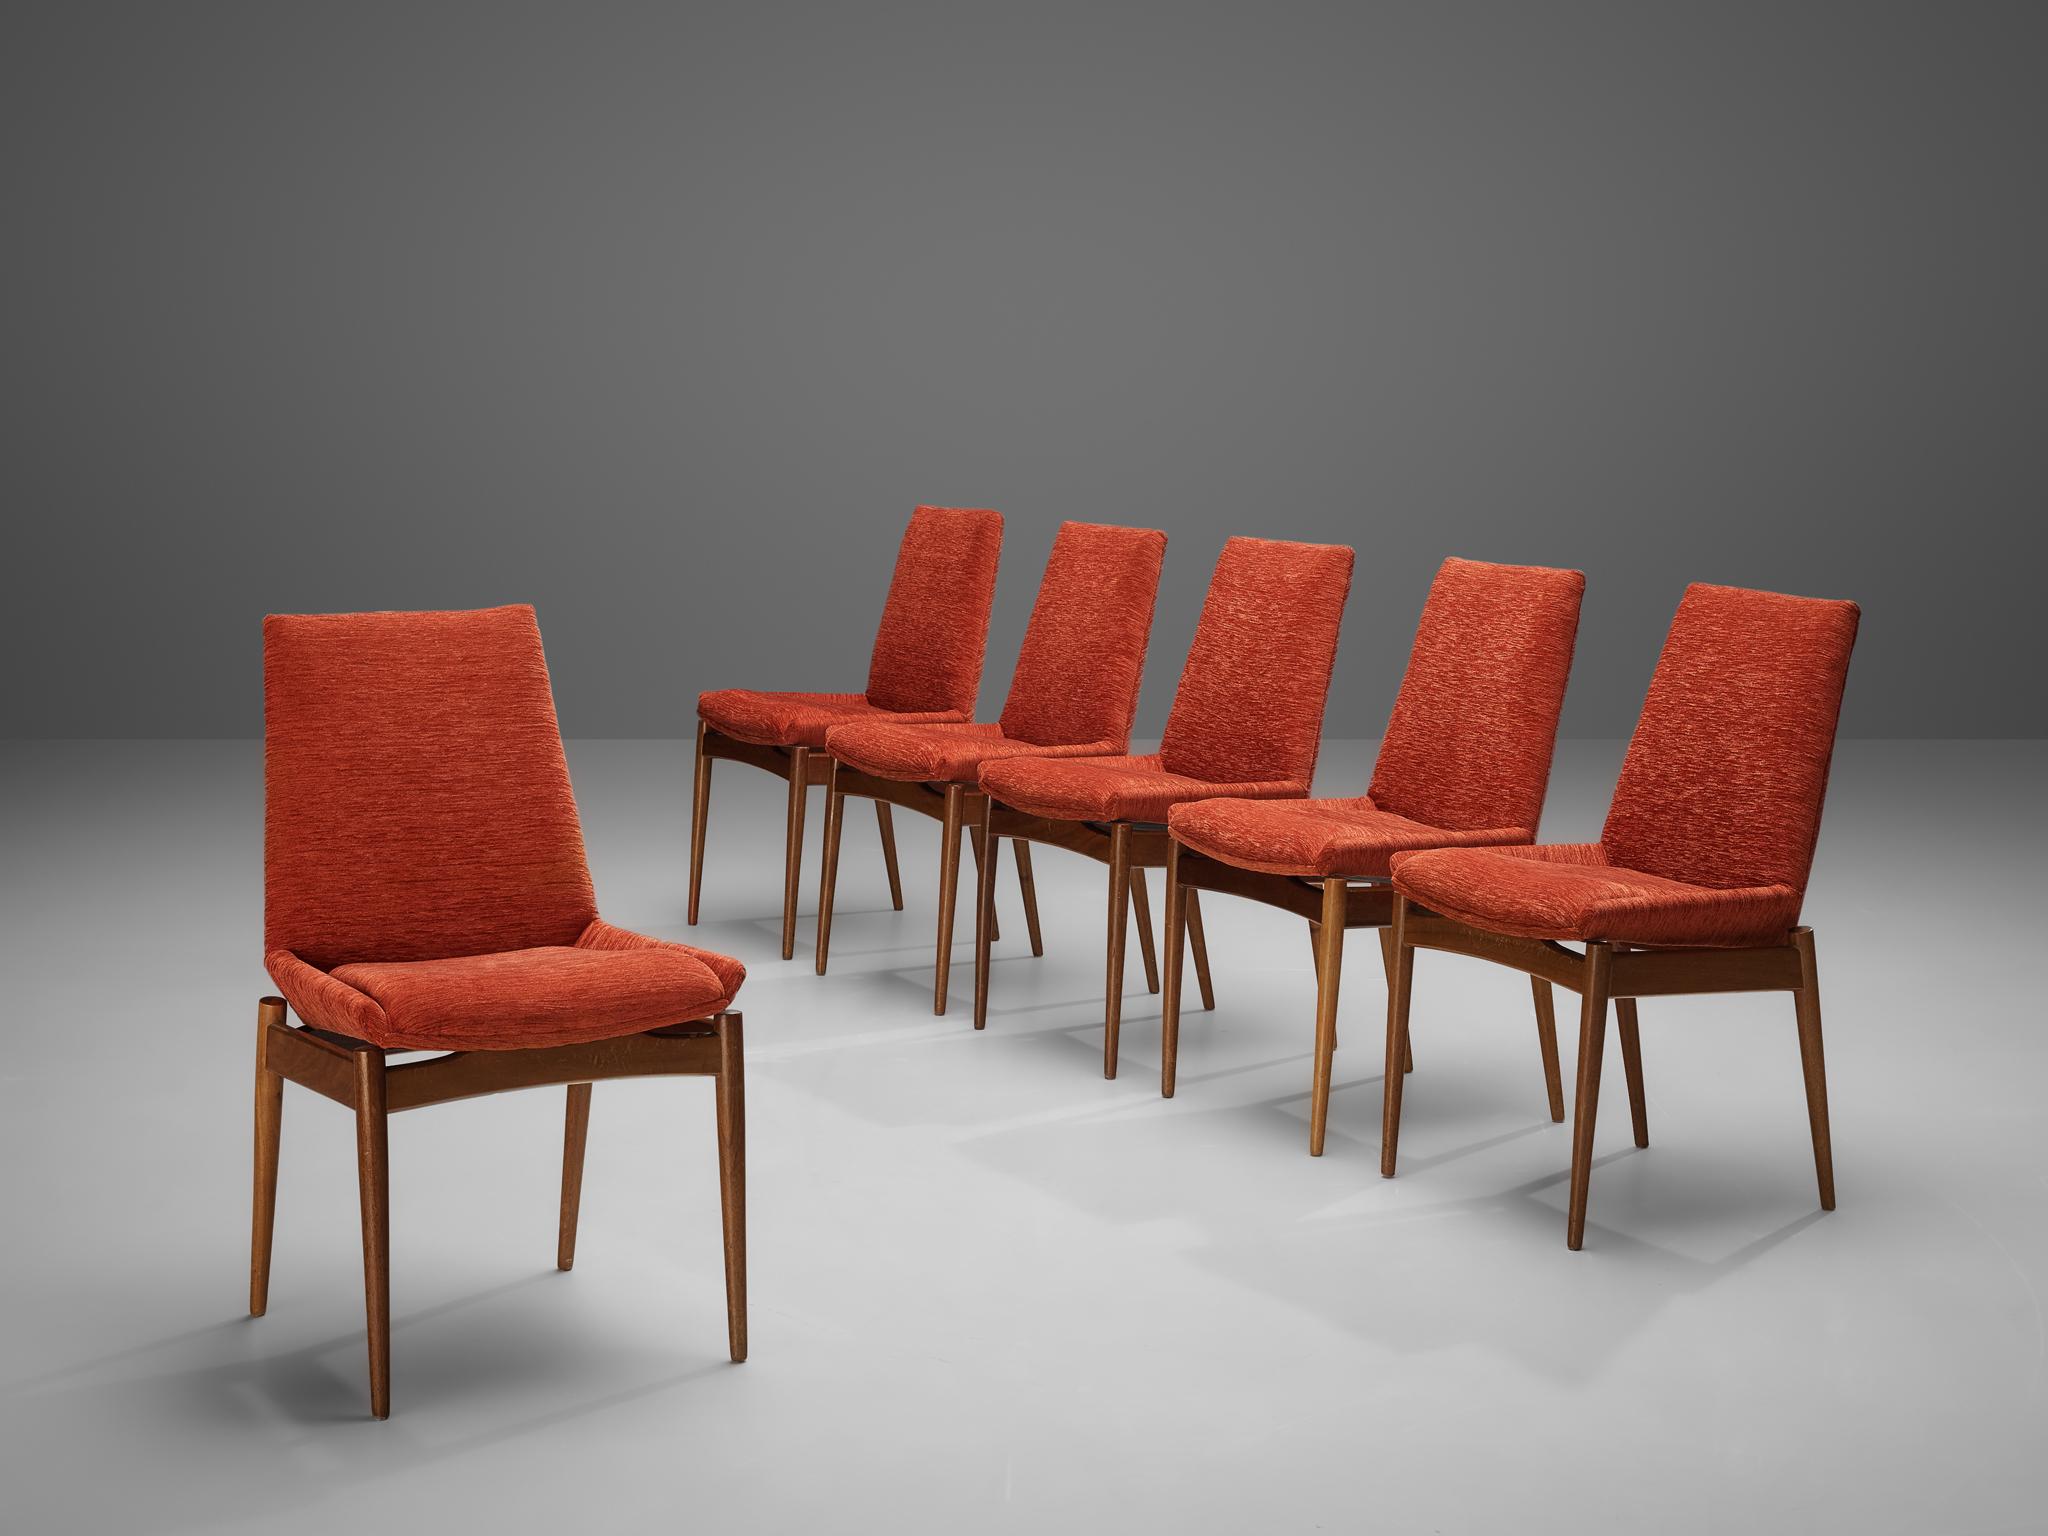 Robert Heritage for Archie Shine, set of six dining chairs, mahogany, red corduroy, United Kingdom, 1960s

The set of six chairs is sensuous, sculptural and elegant. The design features a high, sculpted back. The curved, tapered legs give the unit a